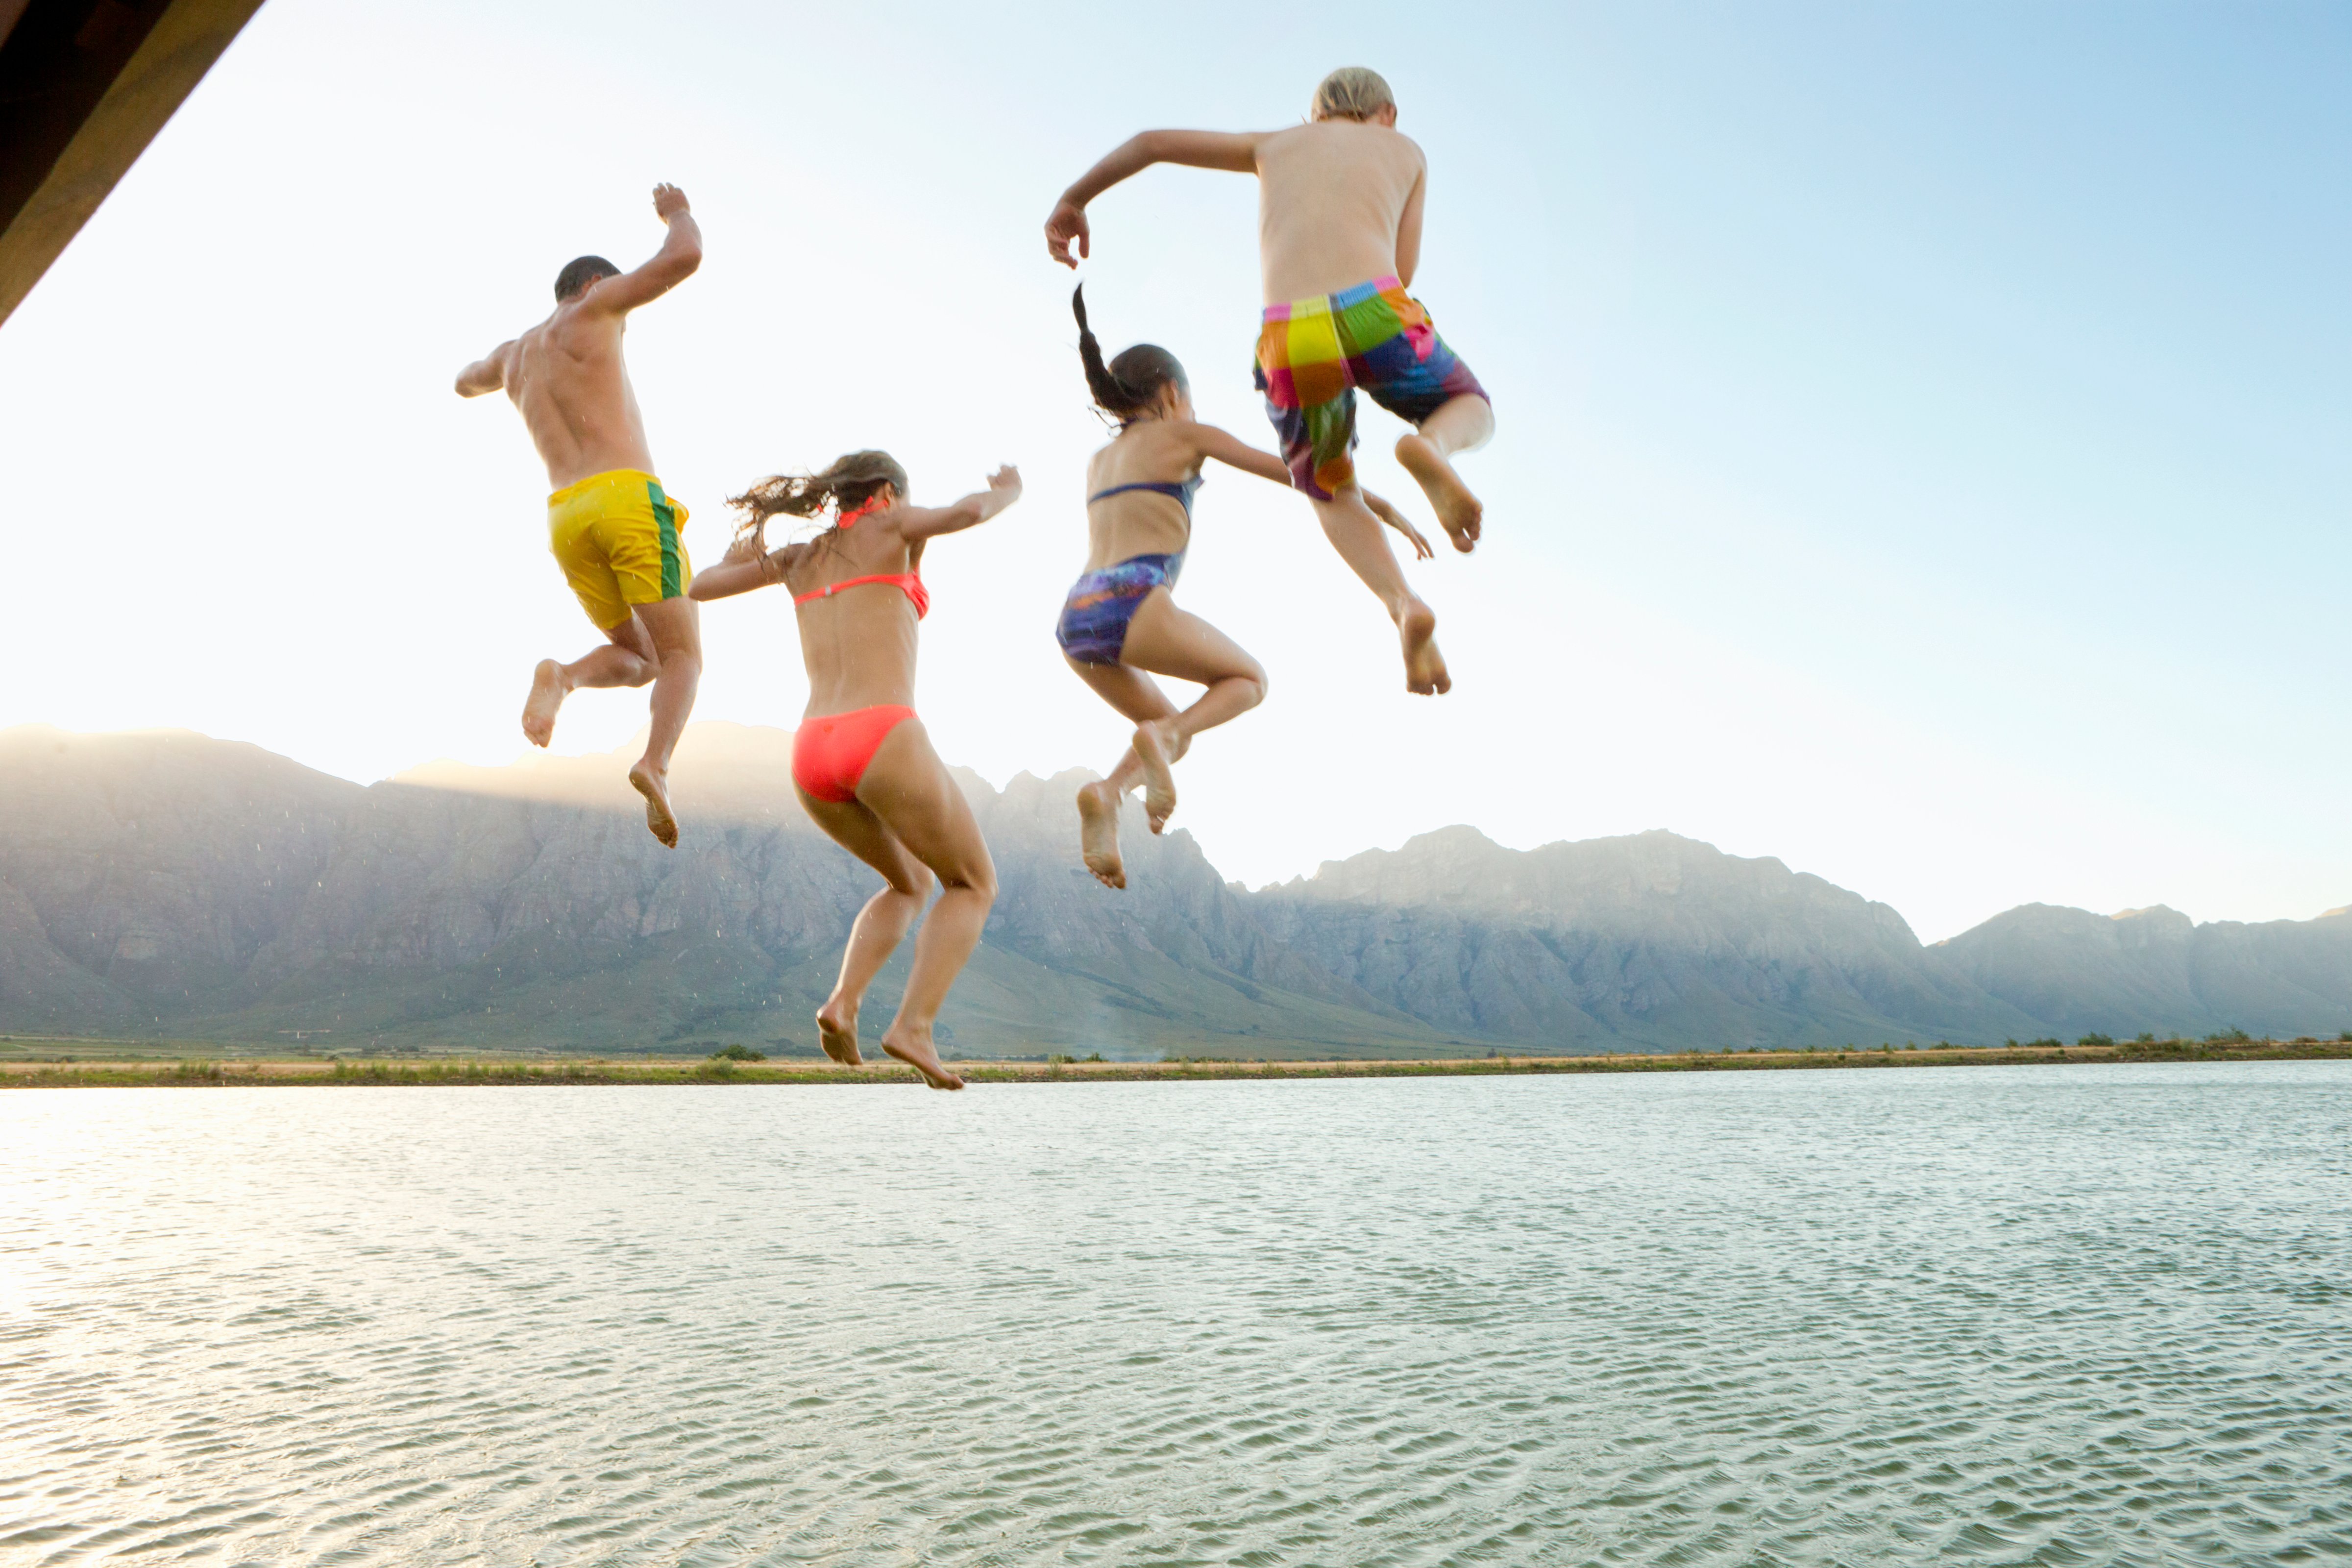 Family, in swimwear, jumping into a lake from a jetty